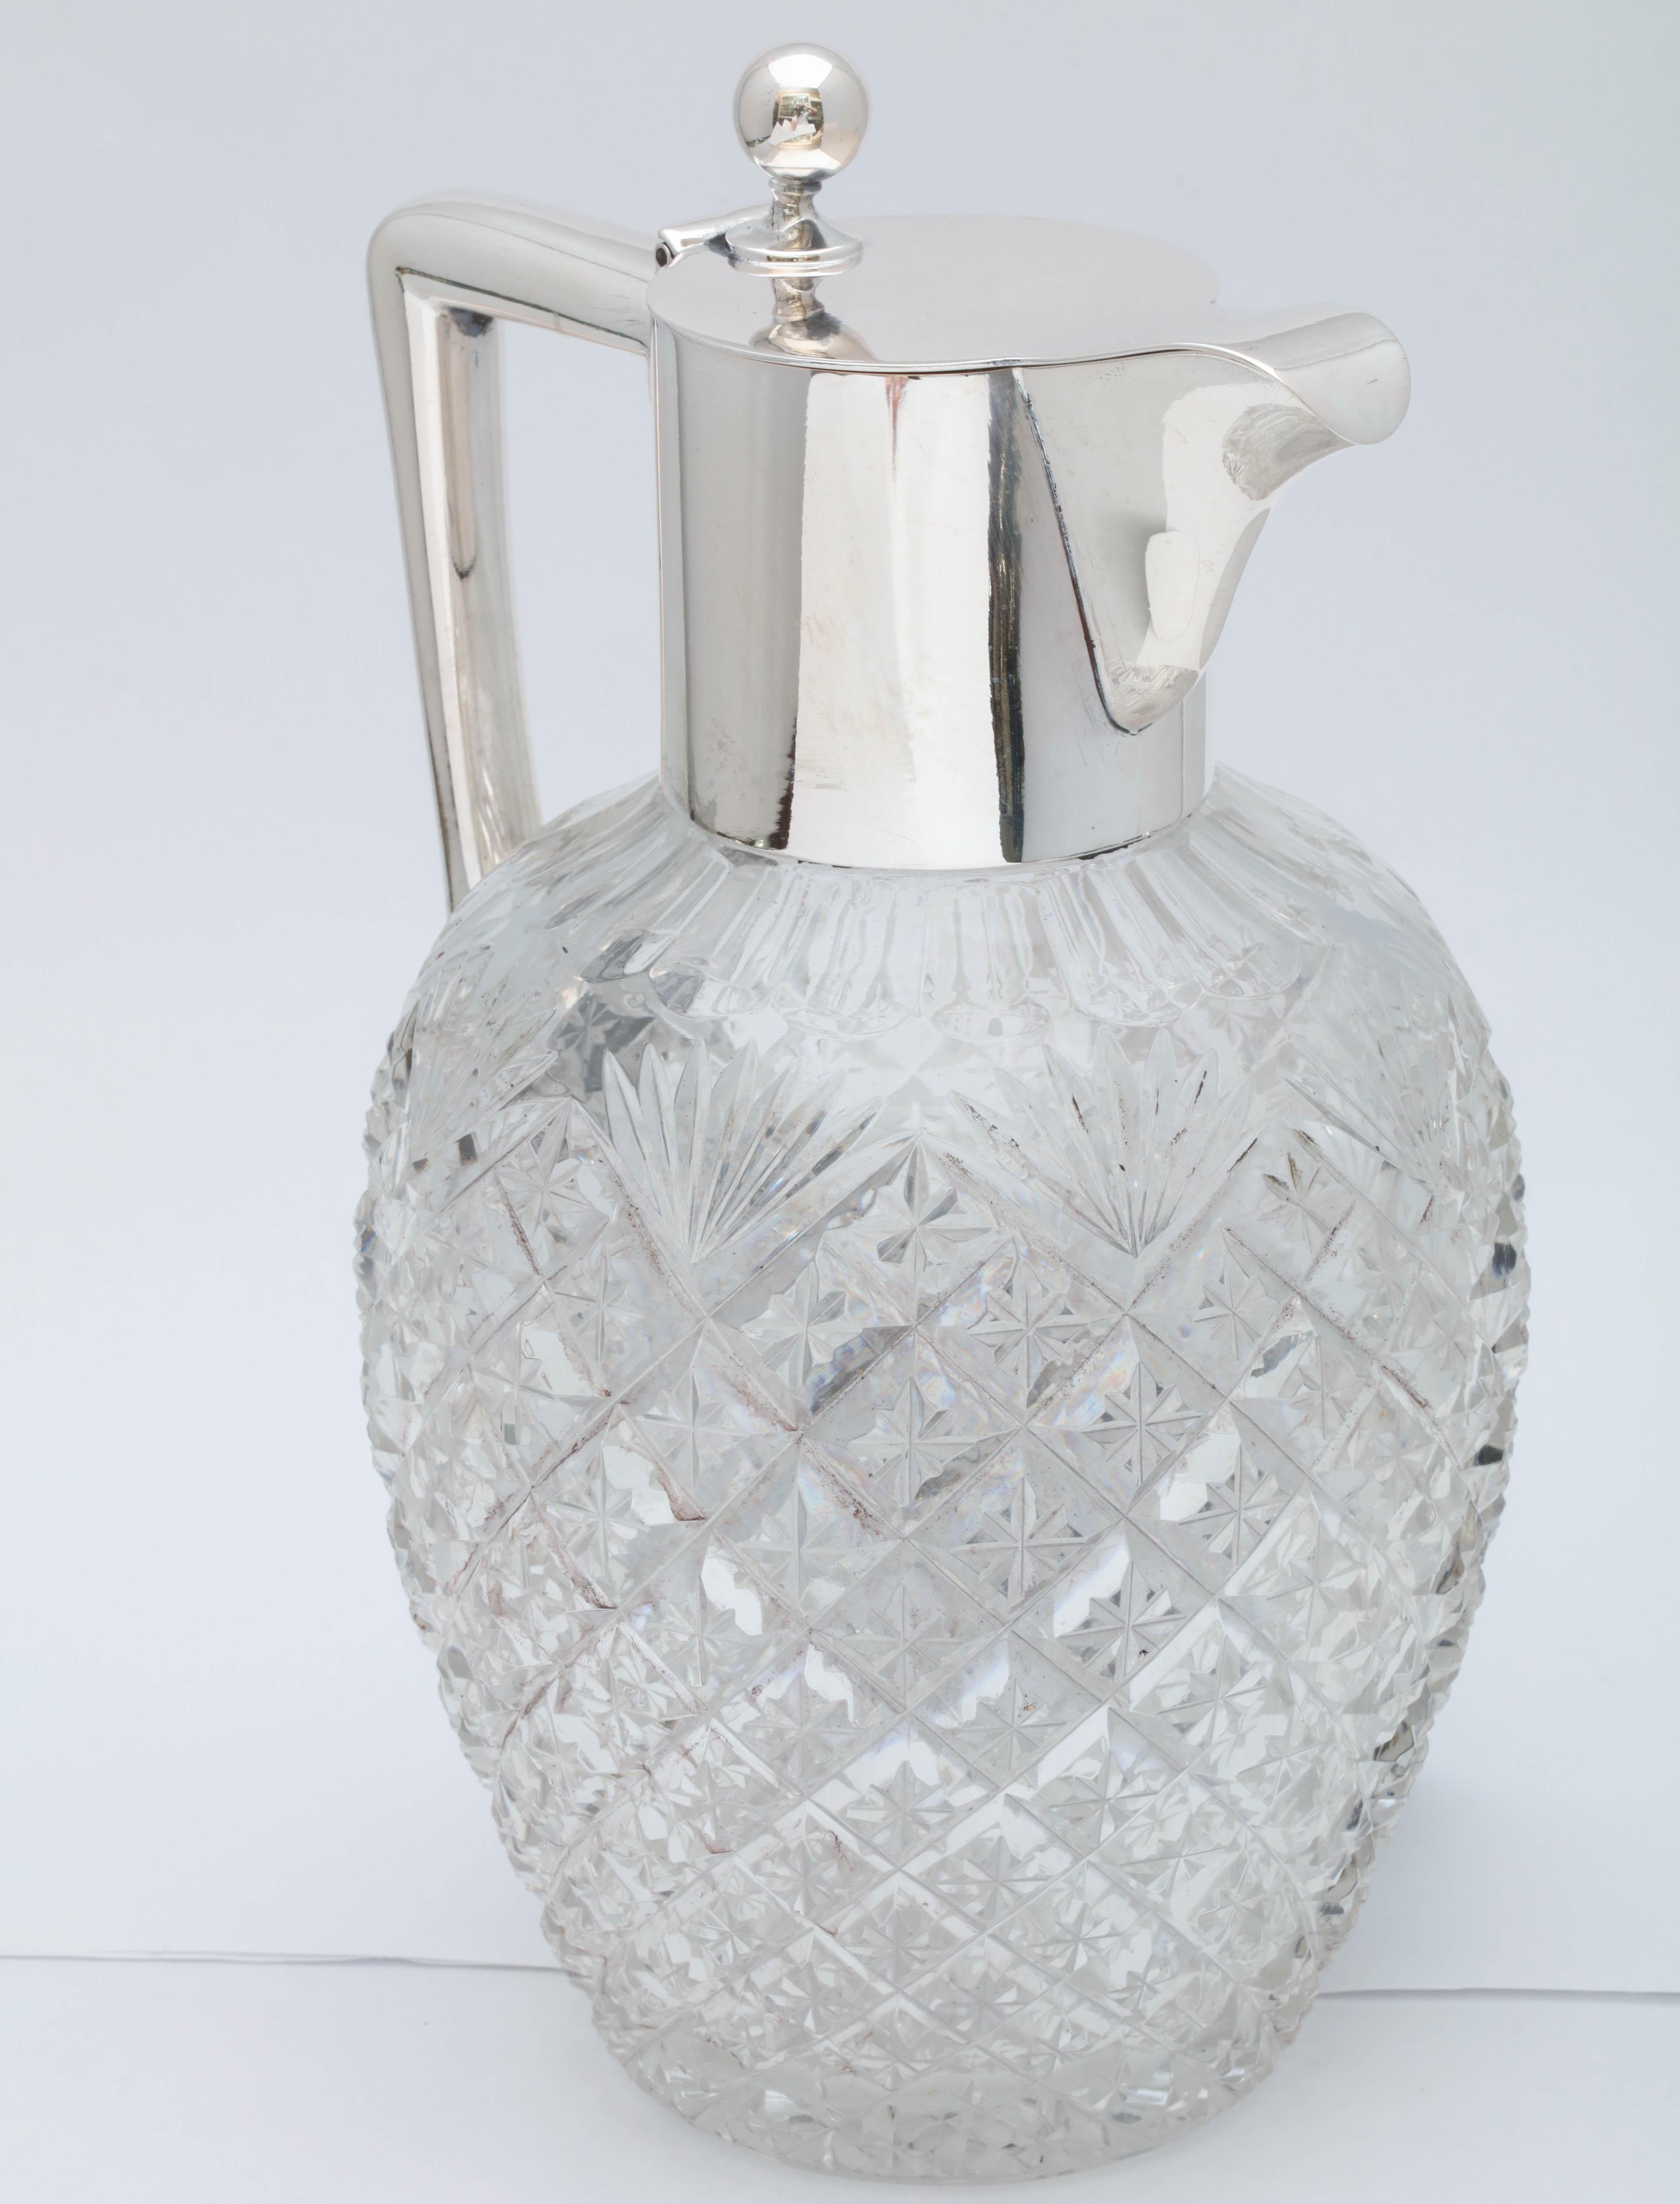 Edwardian, continental silver (.800) - mounted cut glass claret jug, with hinged lid, Germany, circa 1905. Measures 9 inches high to top of finial x 5 3/4 inches wide from outer edge of handle to outer edge of spout x 5 inches deep. Dark spots in